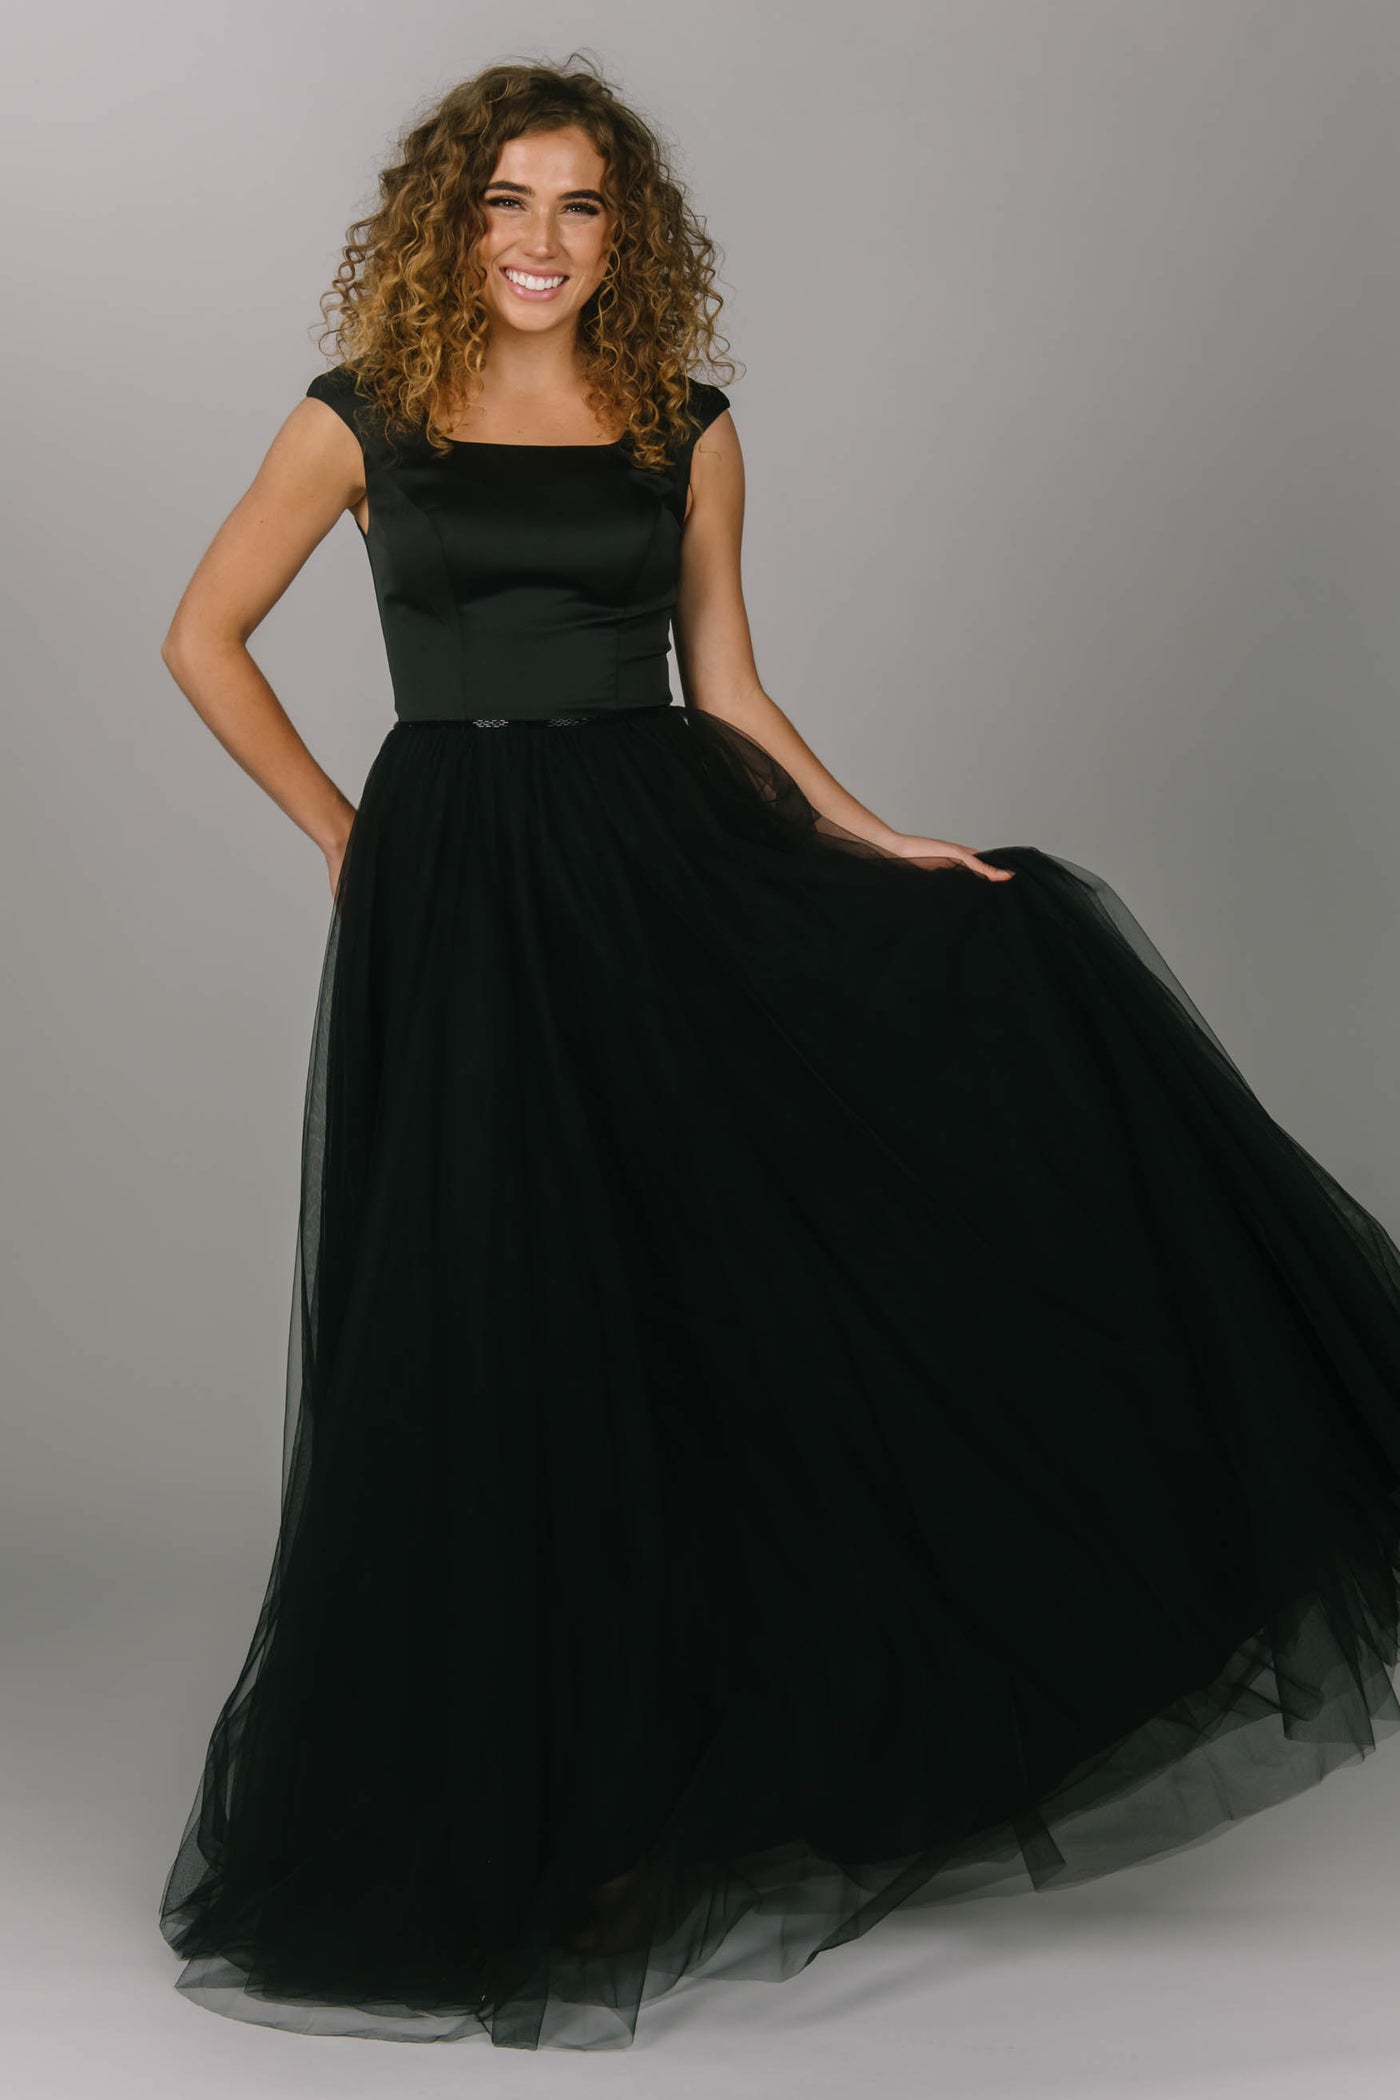 Black modest prom dress with tulle skirt. This a-line dress has cap sleeves and a square neckline. Beautiful modest prom dress. 